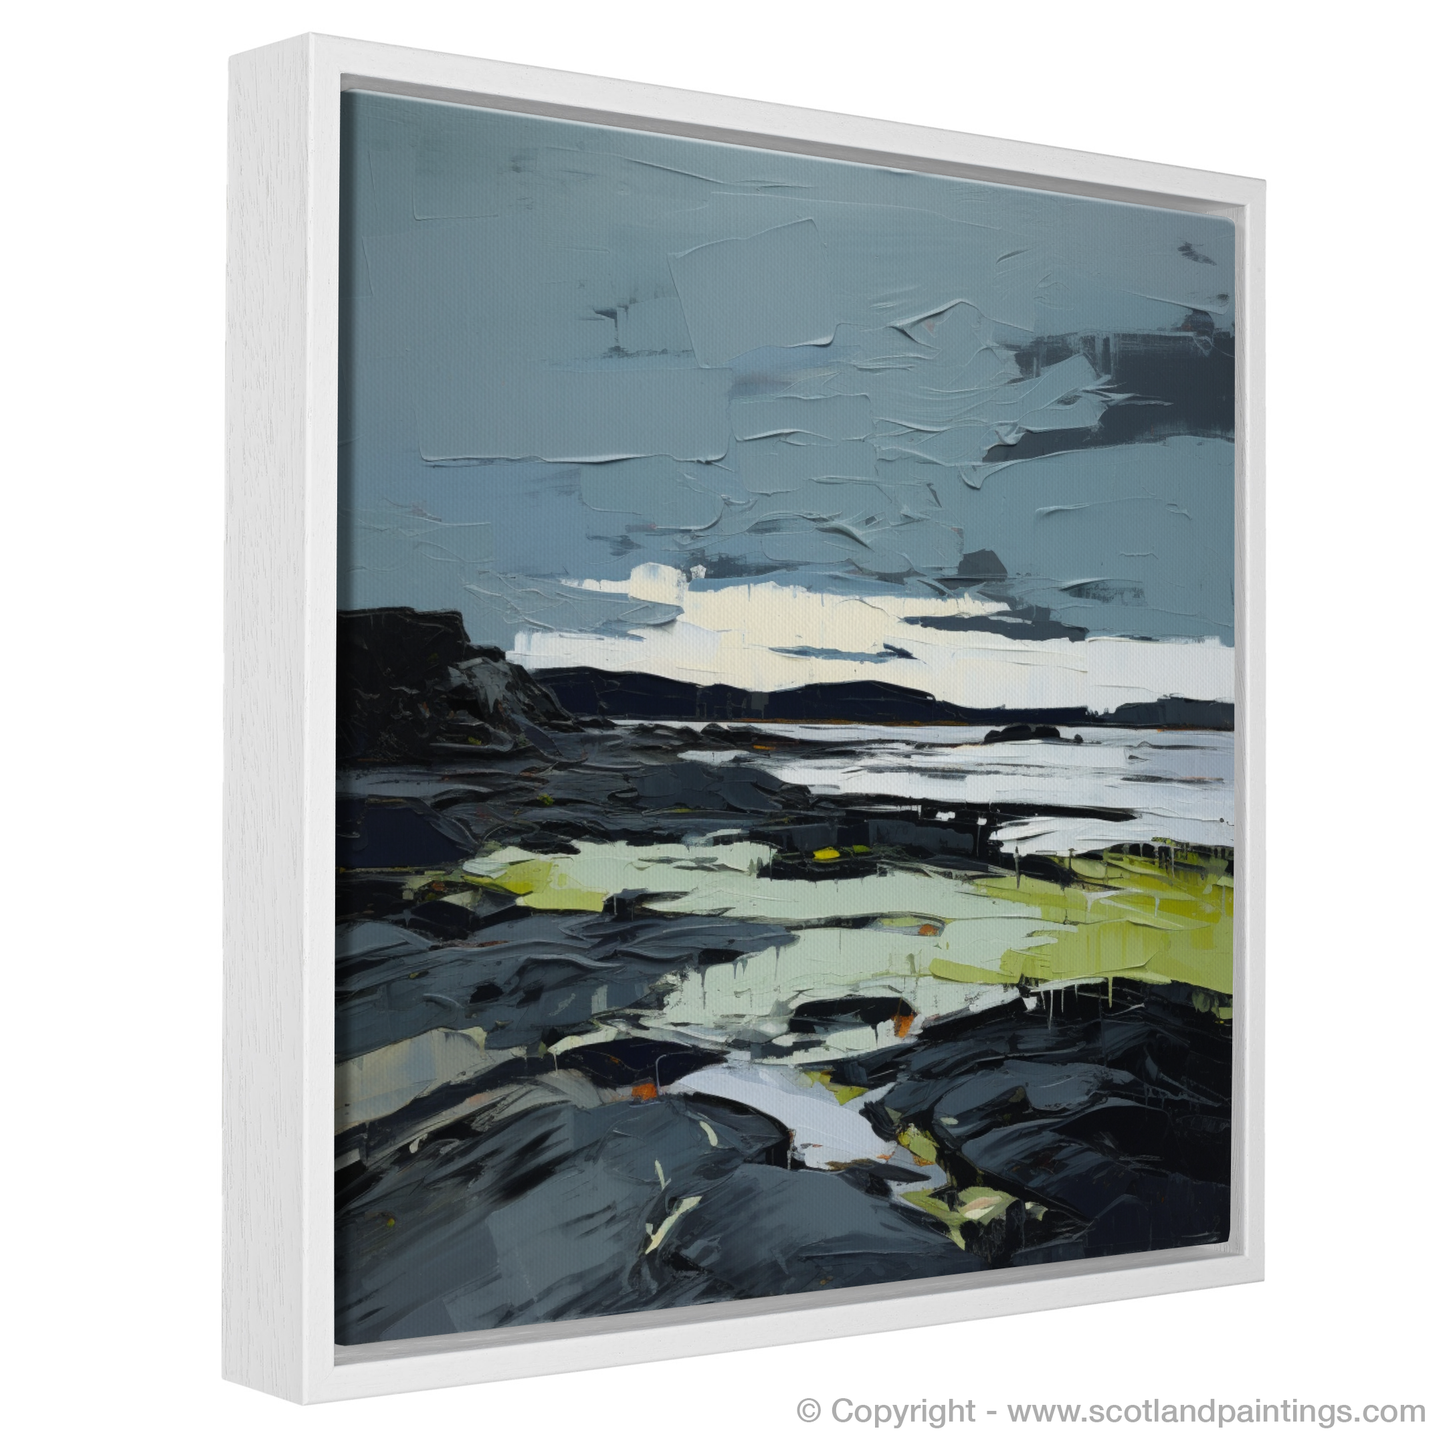 Painting and Art Print of Largo Bay, Fife entitled "Largo Bay Enigma: An Expressionist Ode to Scottish Shores".